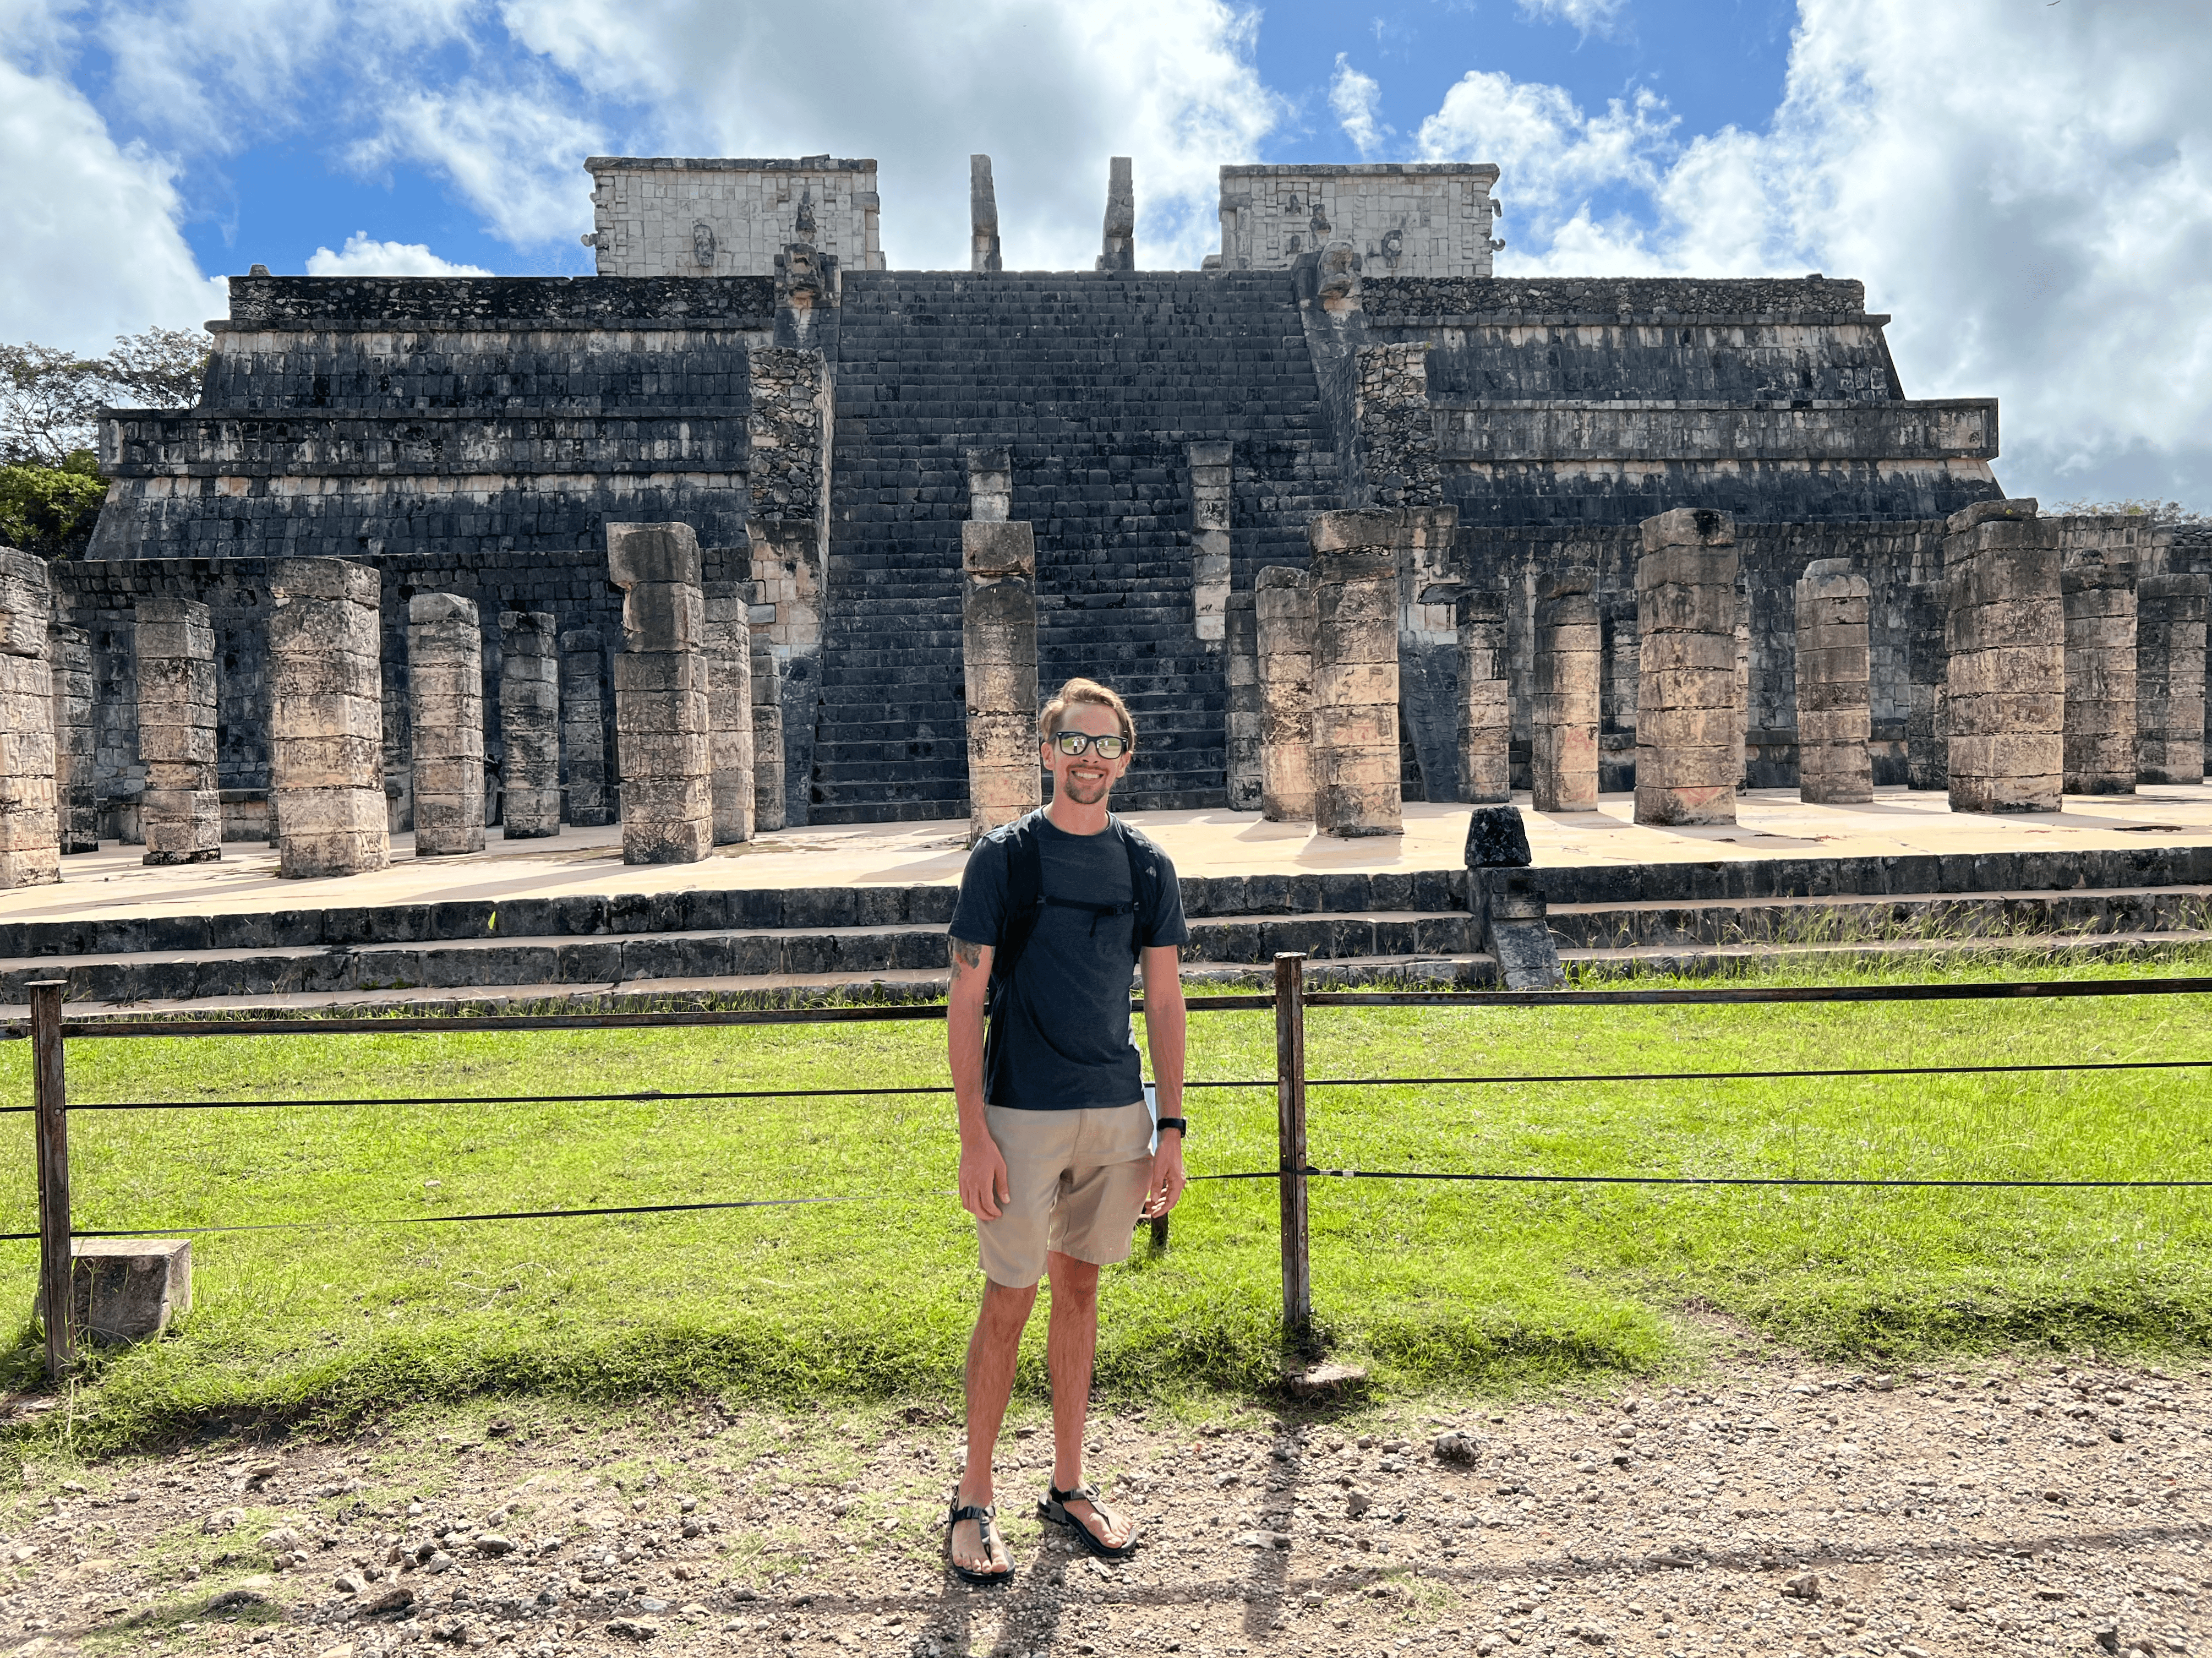 A picture of Jeff in front of ruins at Chichen Itza